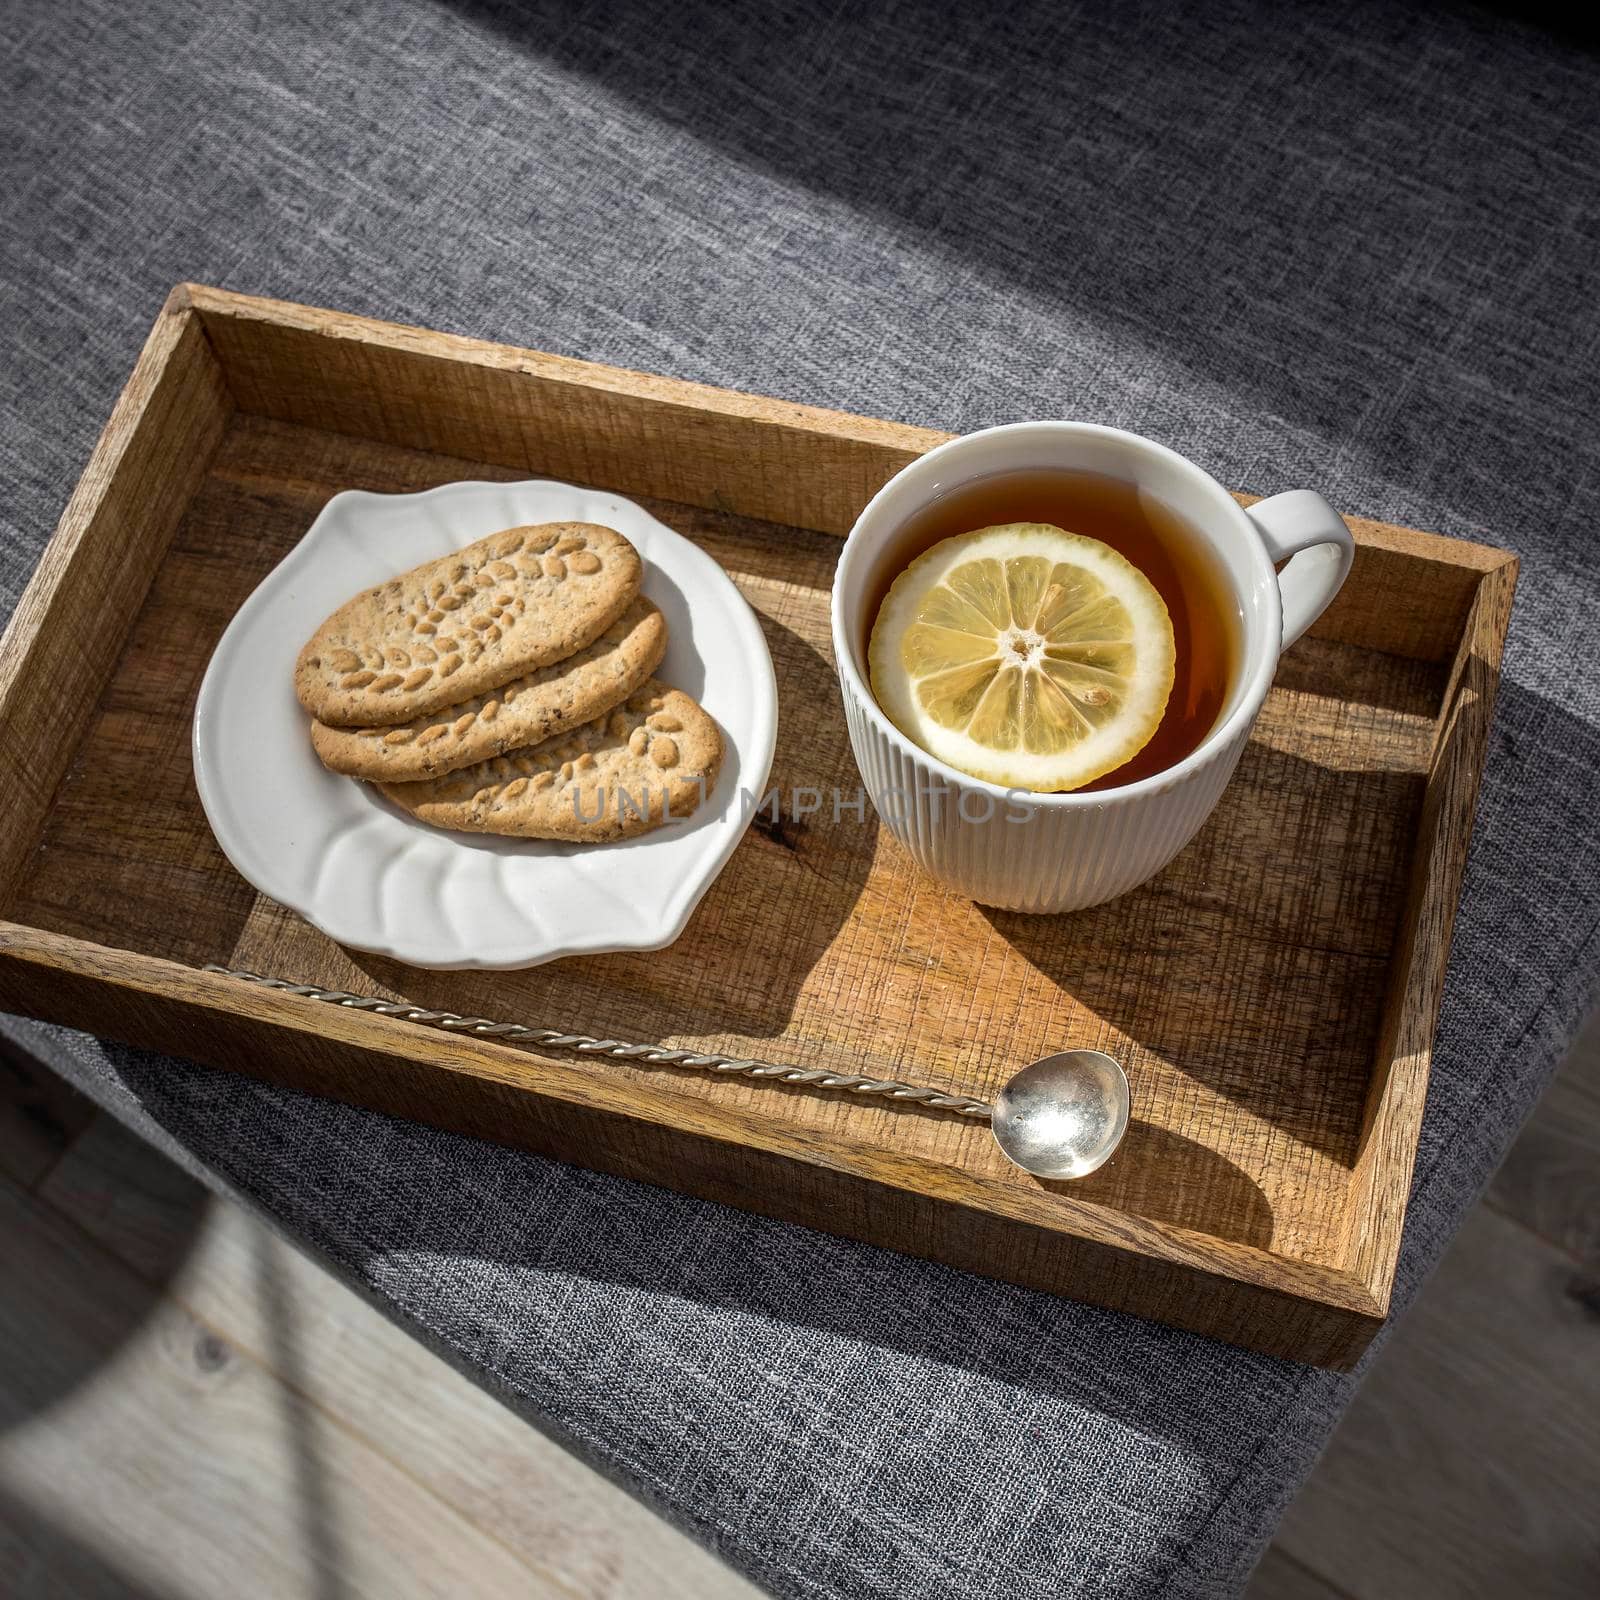 A white cup of tea with lemon, a long cupronickel spoon with a twisted handle and a saucer with three oatmeal cookies for breakfast on a wooden tray, a rag napkin on a gray sofa. Serving